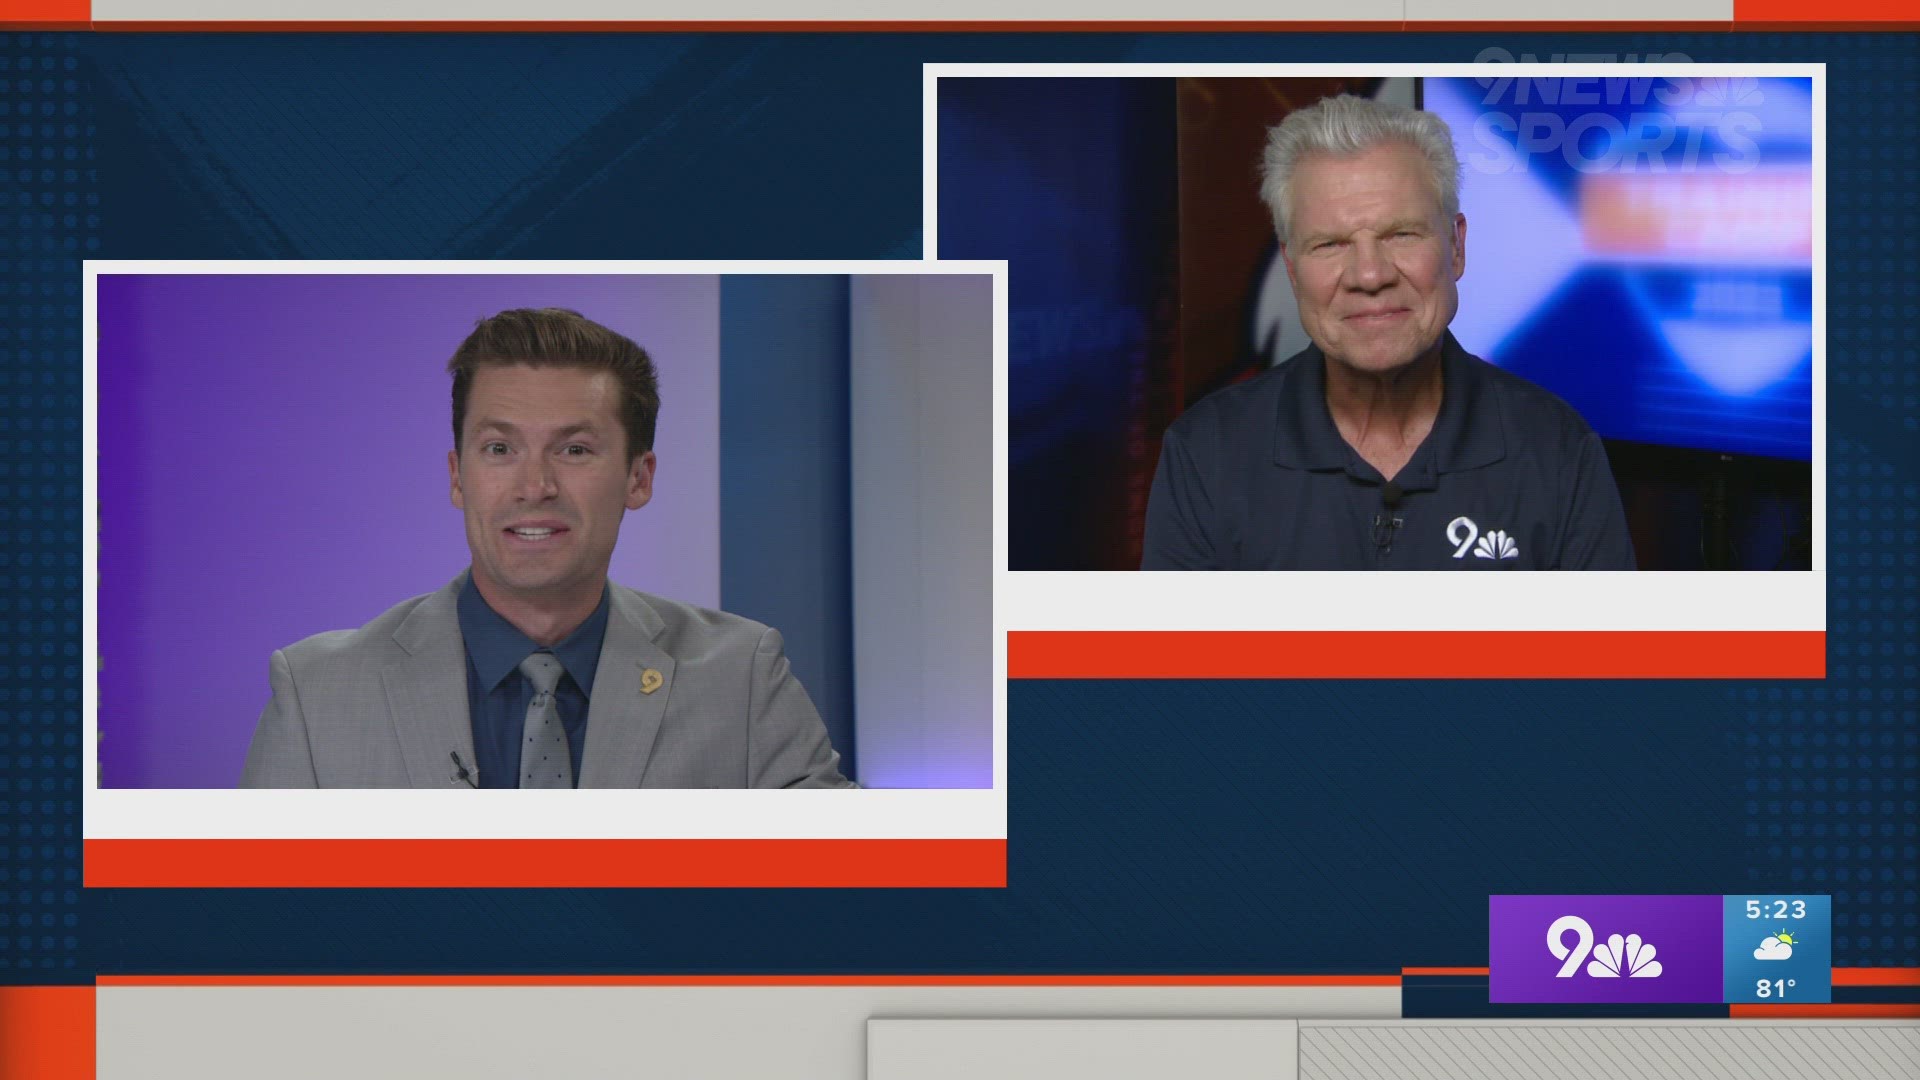 Mike Klis joined Scotty Gange live on 9NEWS to discuss the latest on the Denver Broncos.